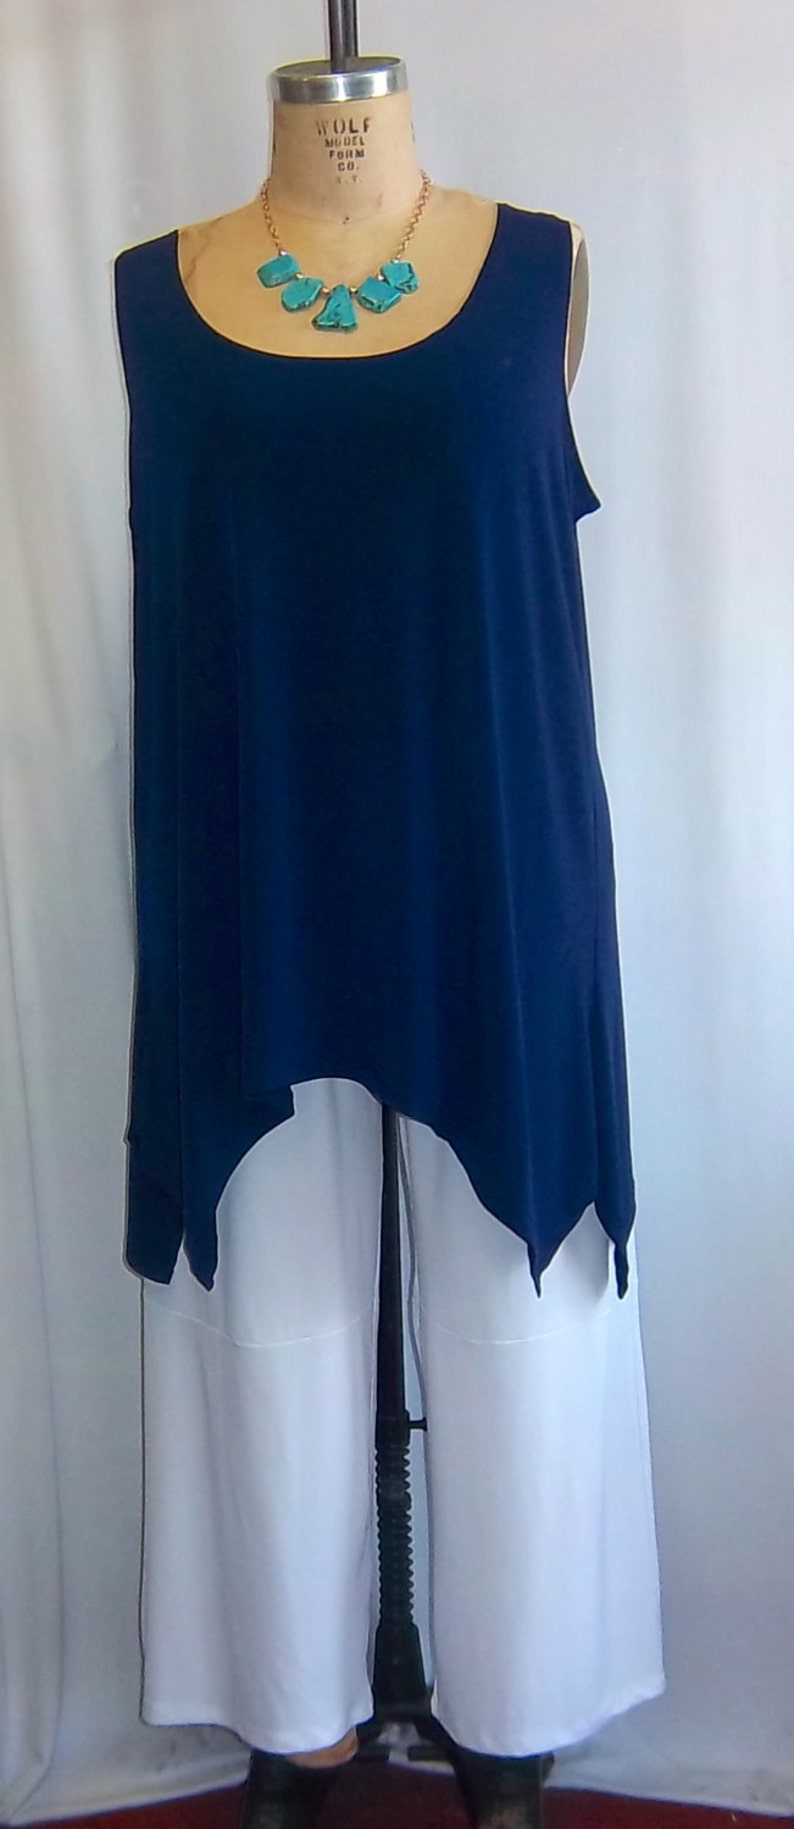 Plus Size Tunic Coco and Juan Lagenlook Plus Size Top Navy | Etsy